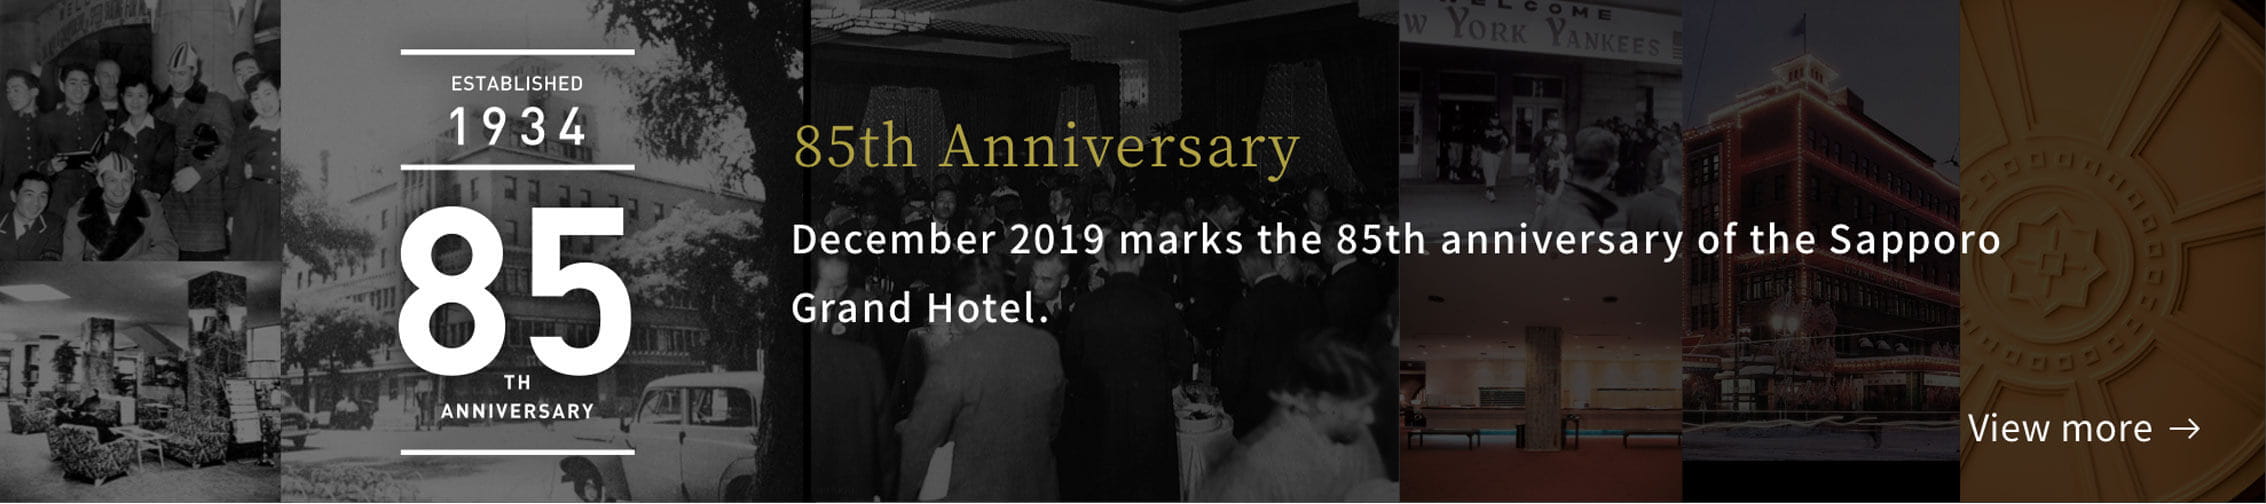 85th Anniversary December 2019 marks the 85th anniversary of the Sapporo Grand Hotel.